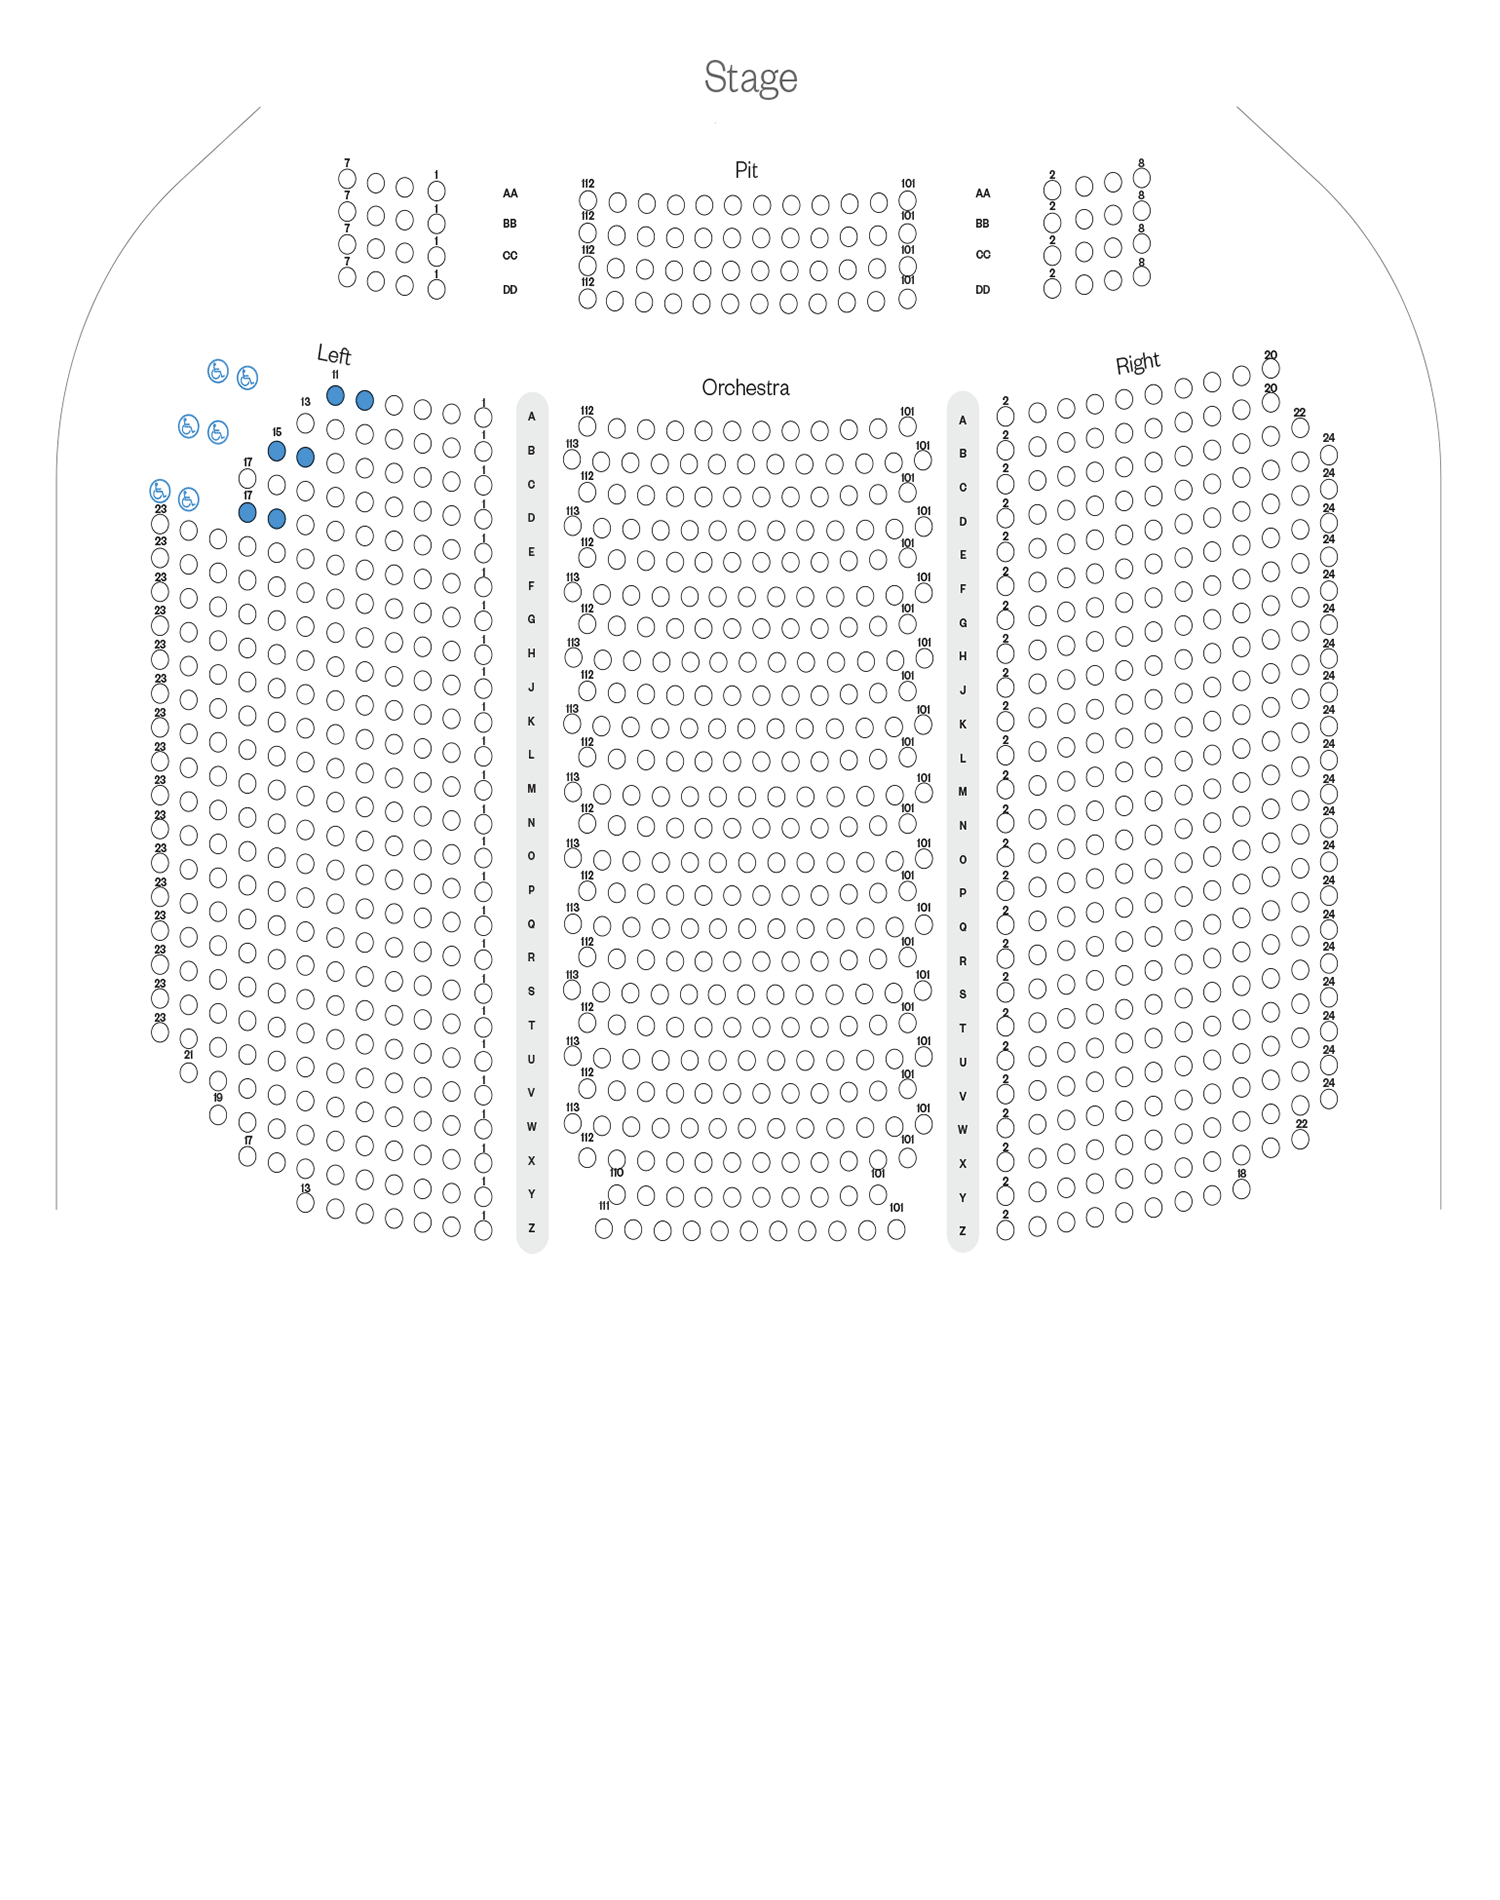 Miller Theater Orchestra Seating Chart